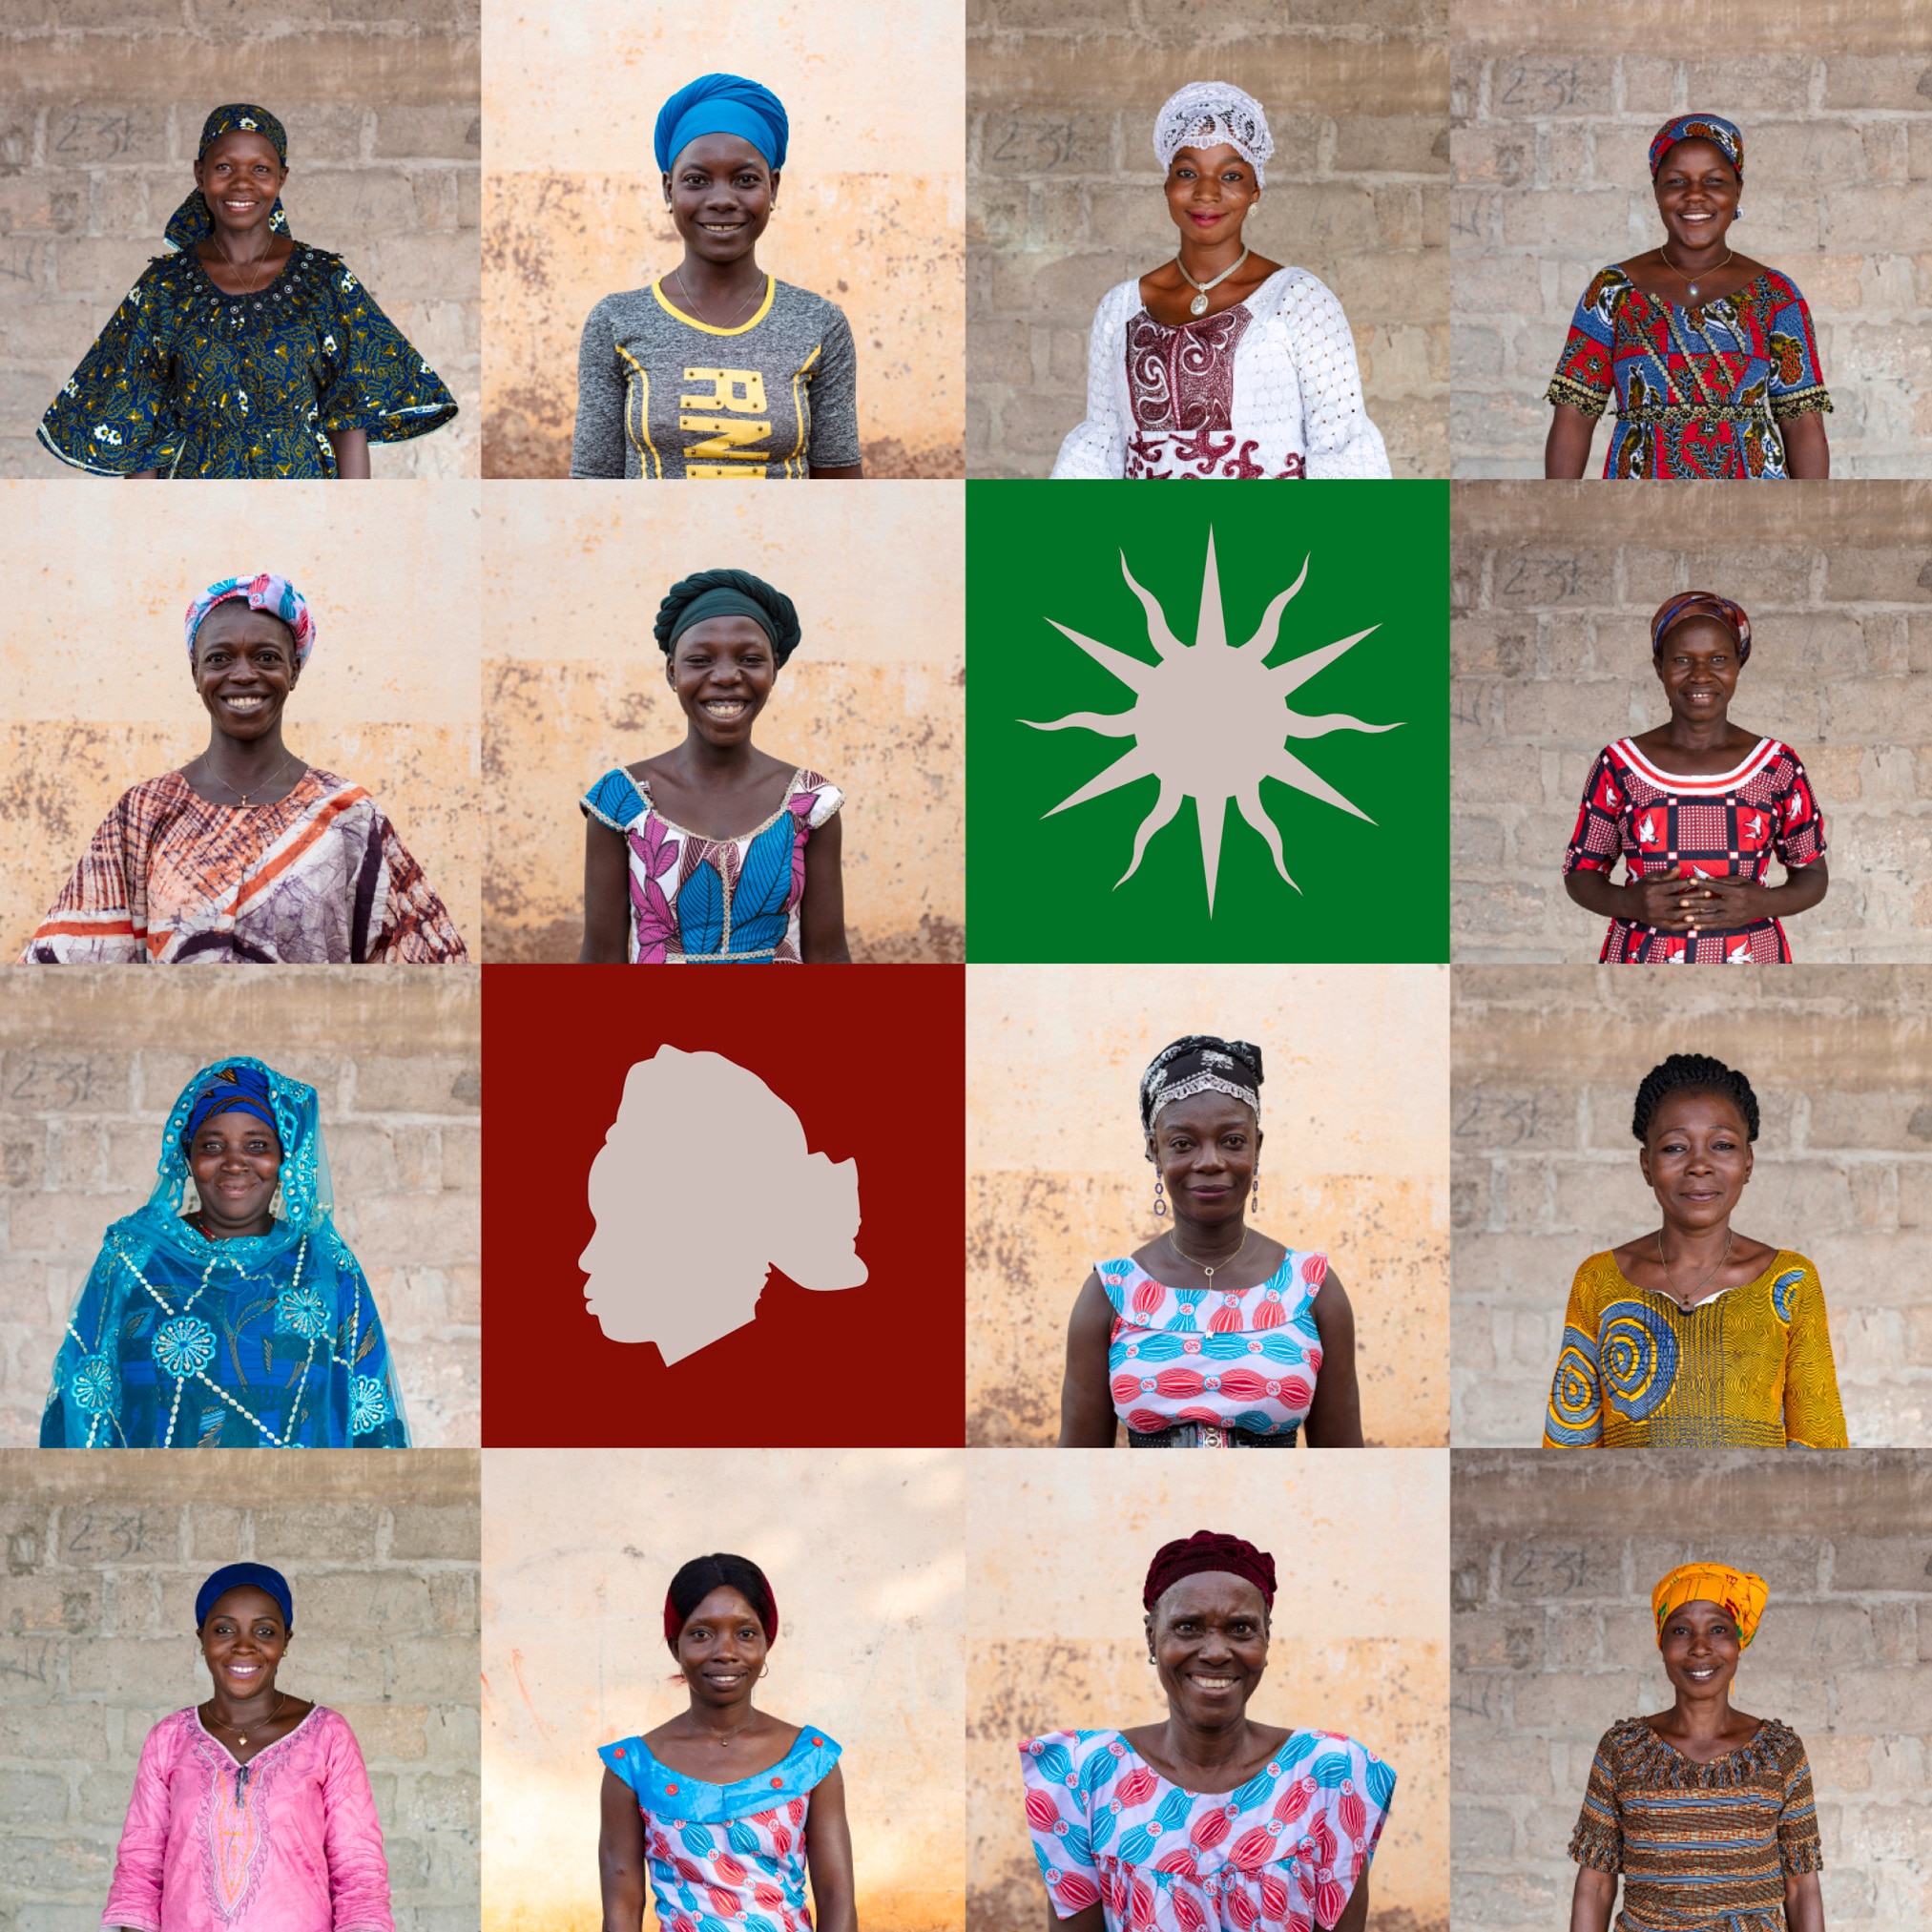 grid of 14 smiling african women portraits #4 - interspersed with a few colourful graphic square cut out illustrations